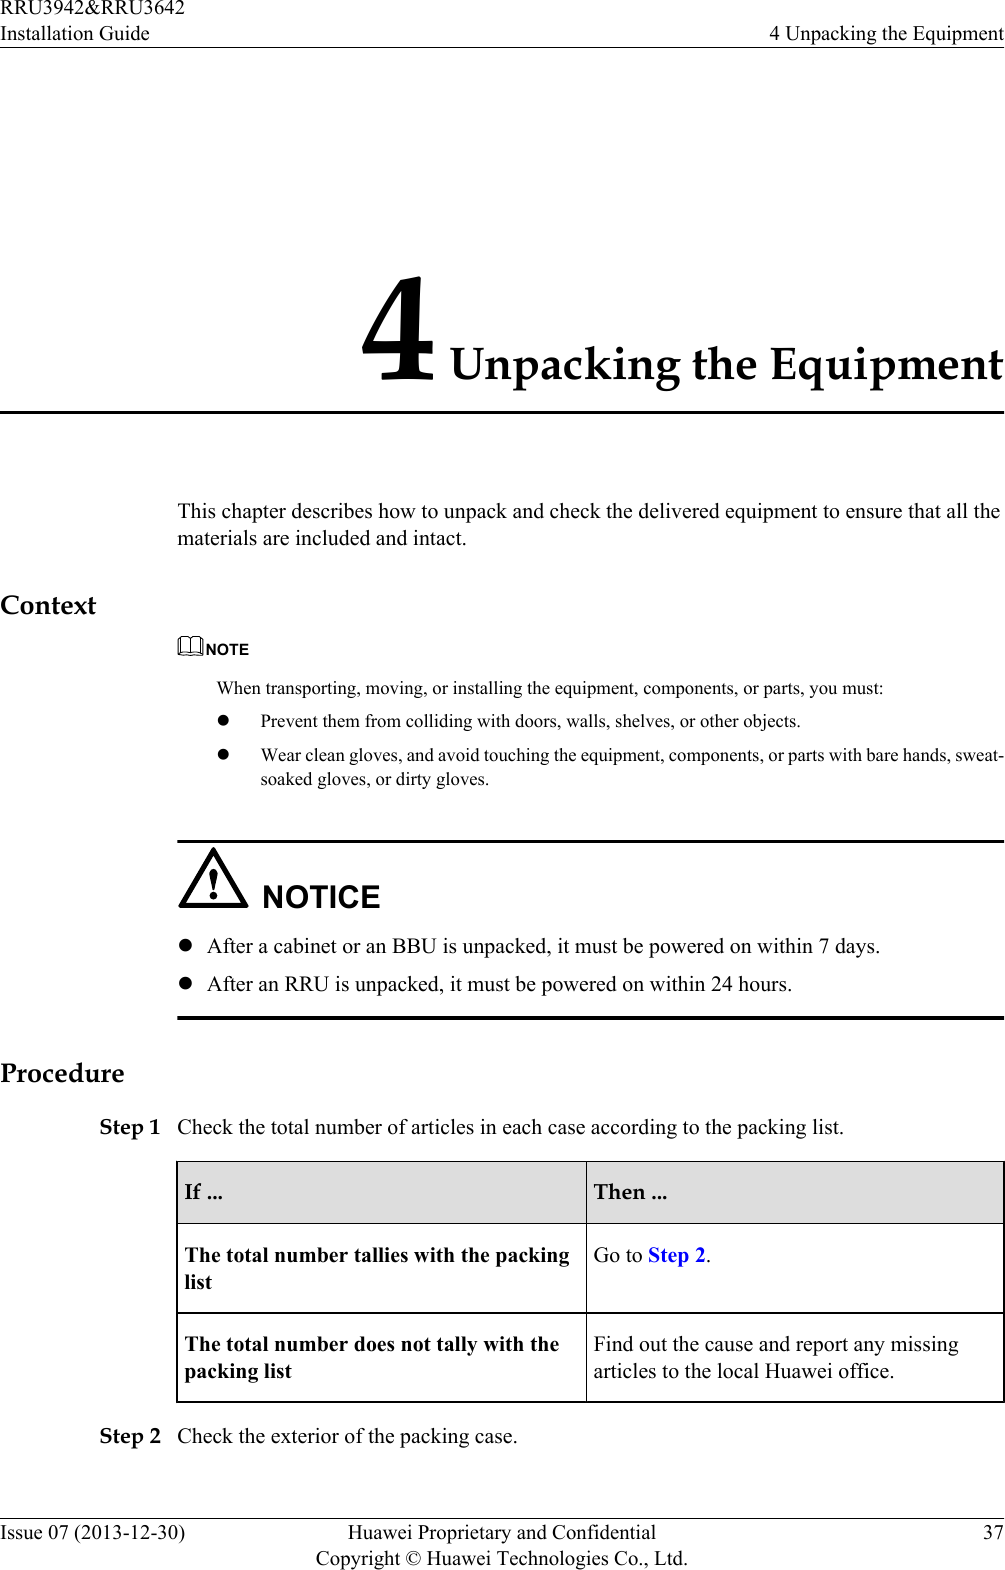 4 Unpacking the EquipmentThis chapter describes how to unpack and check the delivered equipment to ensure that all thematerials are included and intact.ContextNOTEWhen transporting, moving, or installing the equipment, components, or parts, you must:lPrevent them from colliding with doors, walls, shelves, or other objects.lWear clean gloves, and avoid touching the equipment, components, or parts with bare hands, sweat-soaked gloves, or dirty gloves.NOTICElAfter a cabinet or an BBU is unpacked, it must be powered on within 7 days.lAfter an RRU is unpacked, it must be powered on within 24 hours.ProcedureStep 1 Check the total number of articles in each case according to the packing list.If ... Then ...The total number tallies with the packinglistGo to Step 2.The total number does not tally with thepacking listFind out the cause and report any missingarticles to the local Huawei office.Step 2 Check the exterior of the packing case.RRU3942&amp;RRU3642Installation Guide 4 Unpacking the EquipmentIssue 07 (2013-12-30) Huawei Proprietary and ConfidentialCopyright © Huawei Technologies Co., Ltd.37